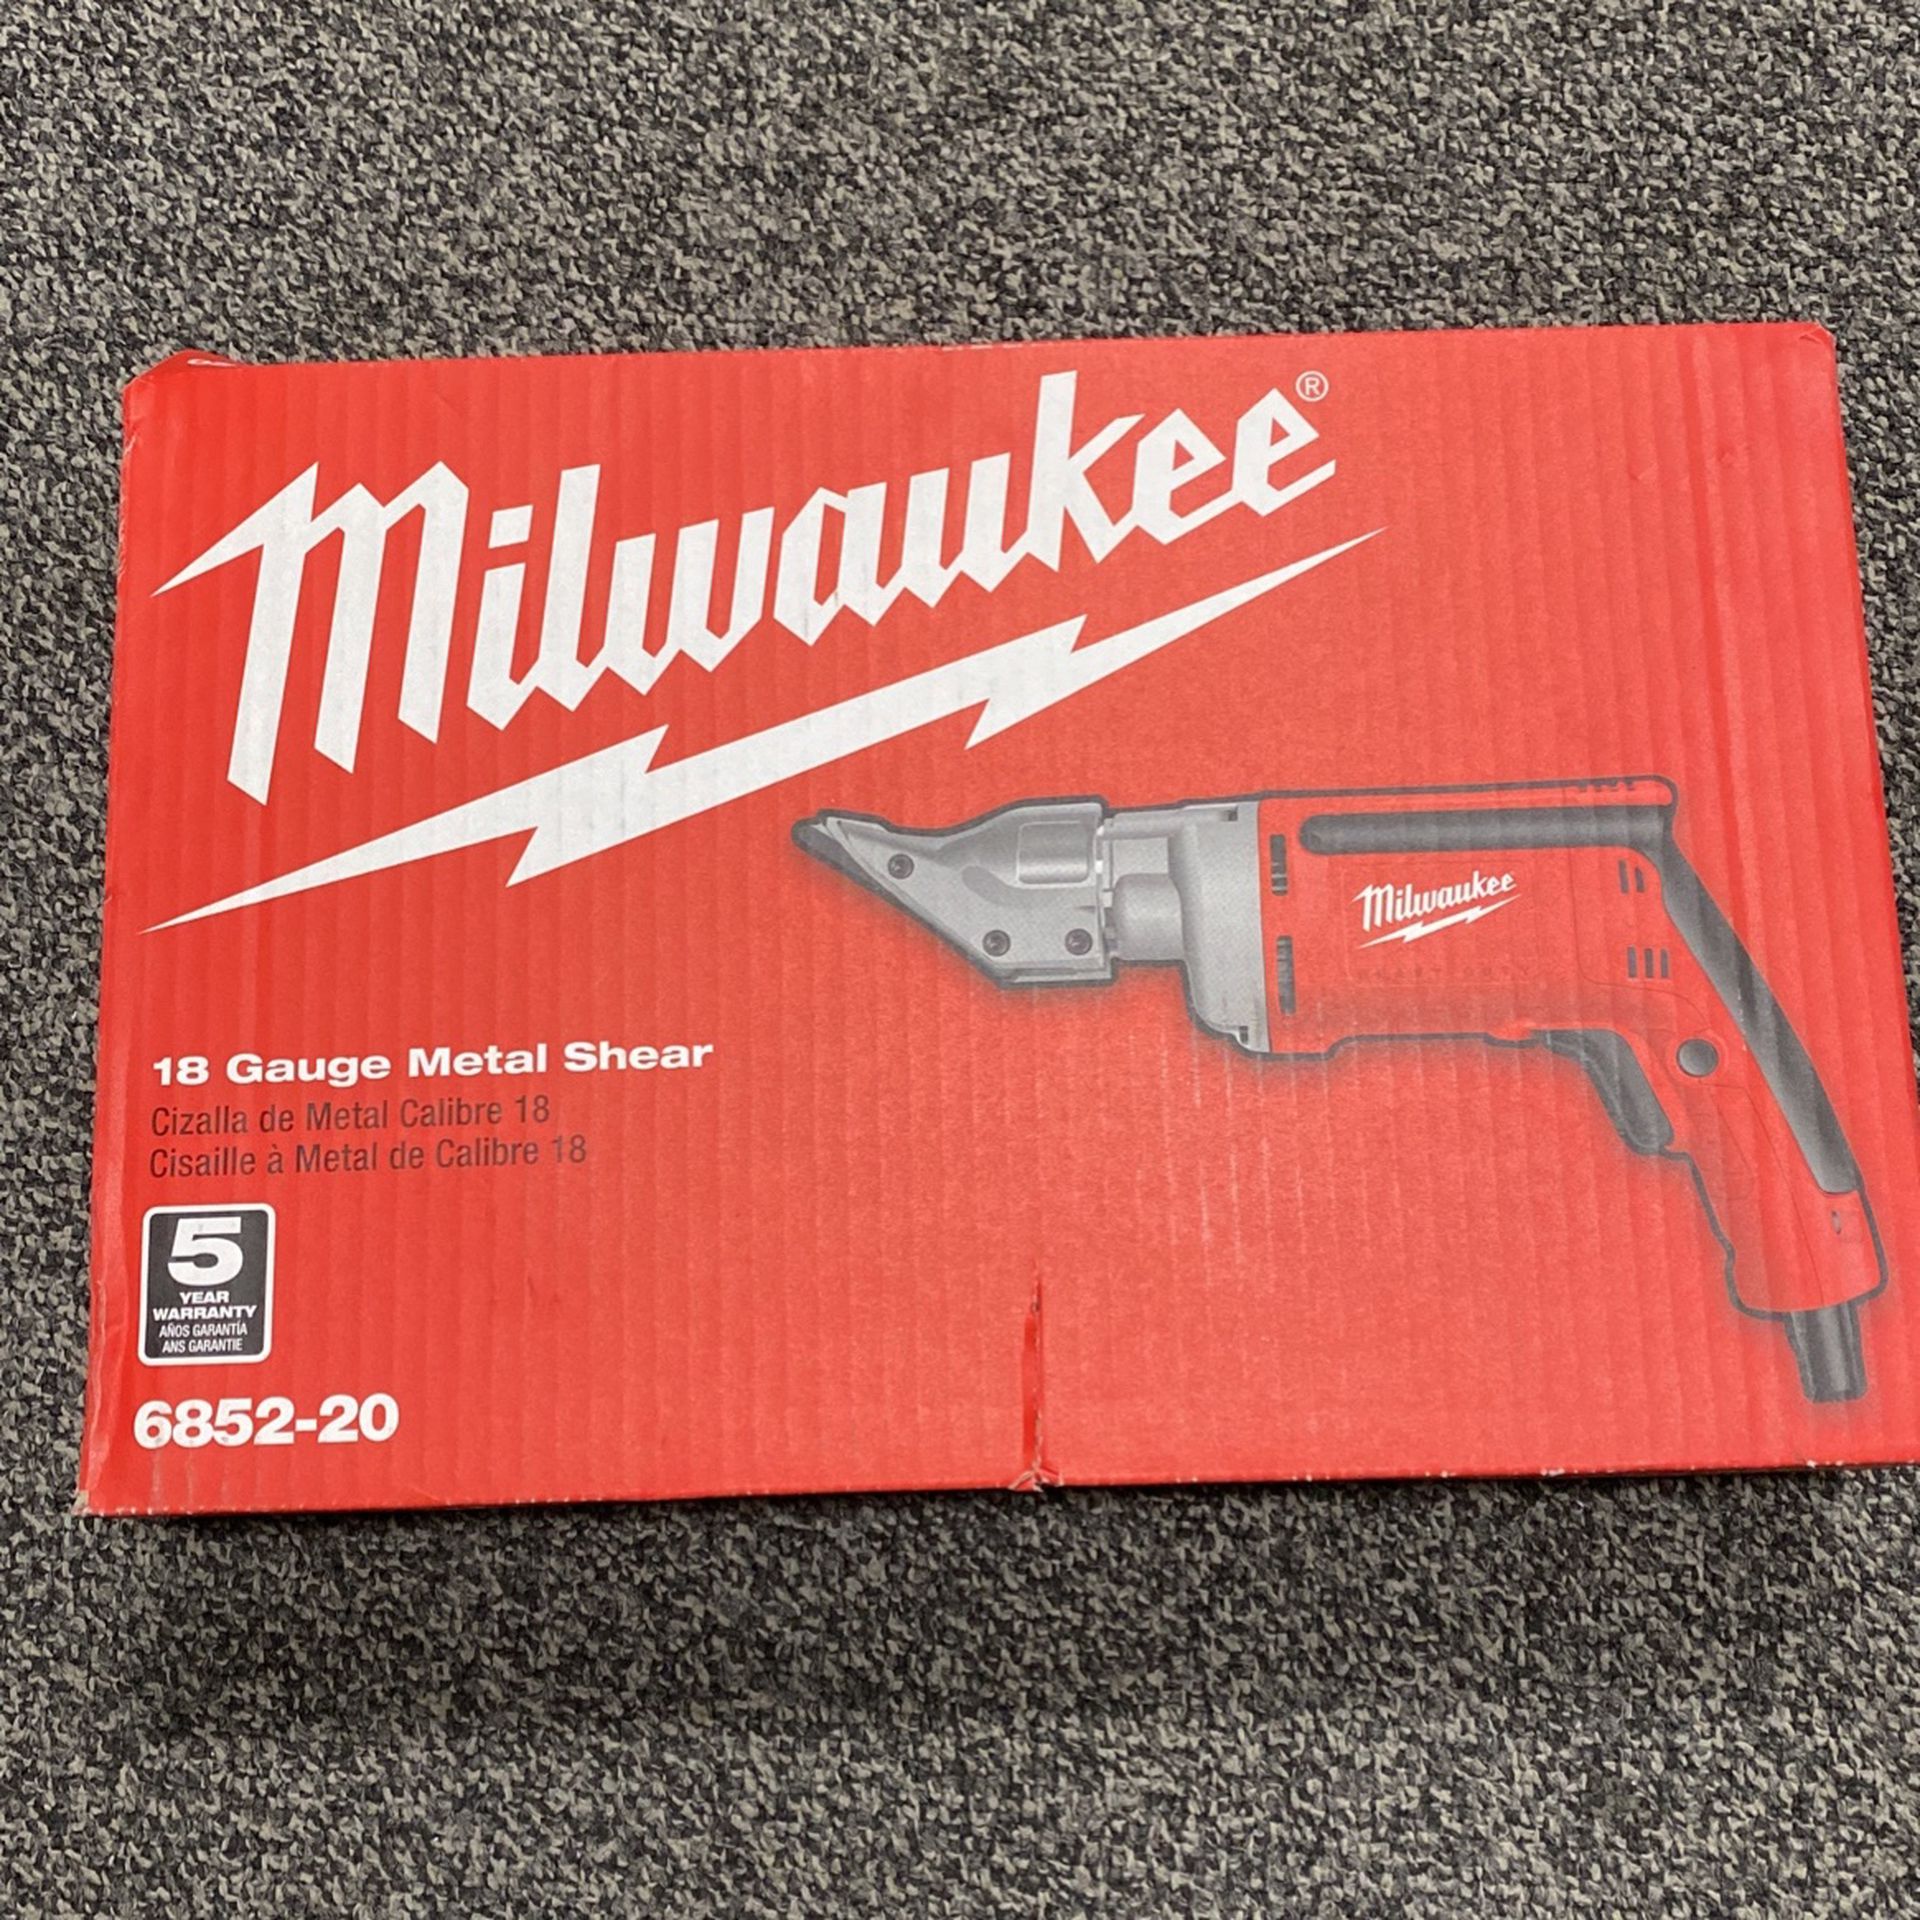 Milwaukee 6852-20 18 Gauge Metal Shears for Sale in Bridgeview, IL OfferUp